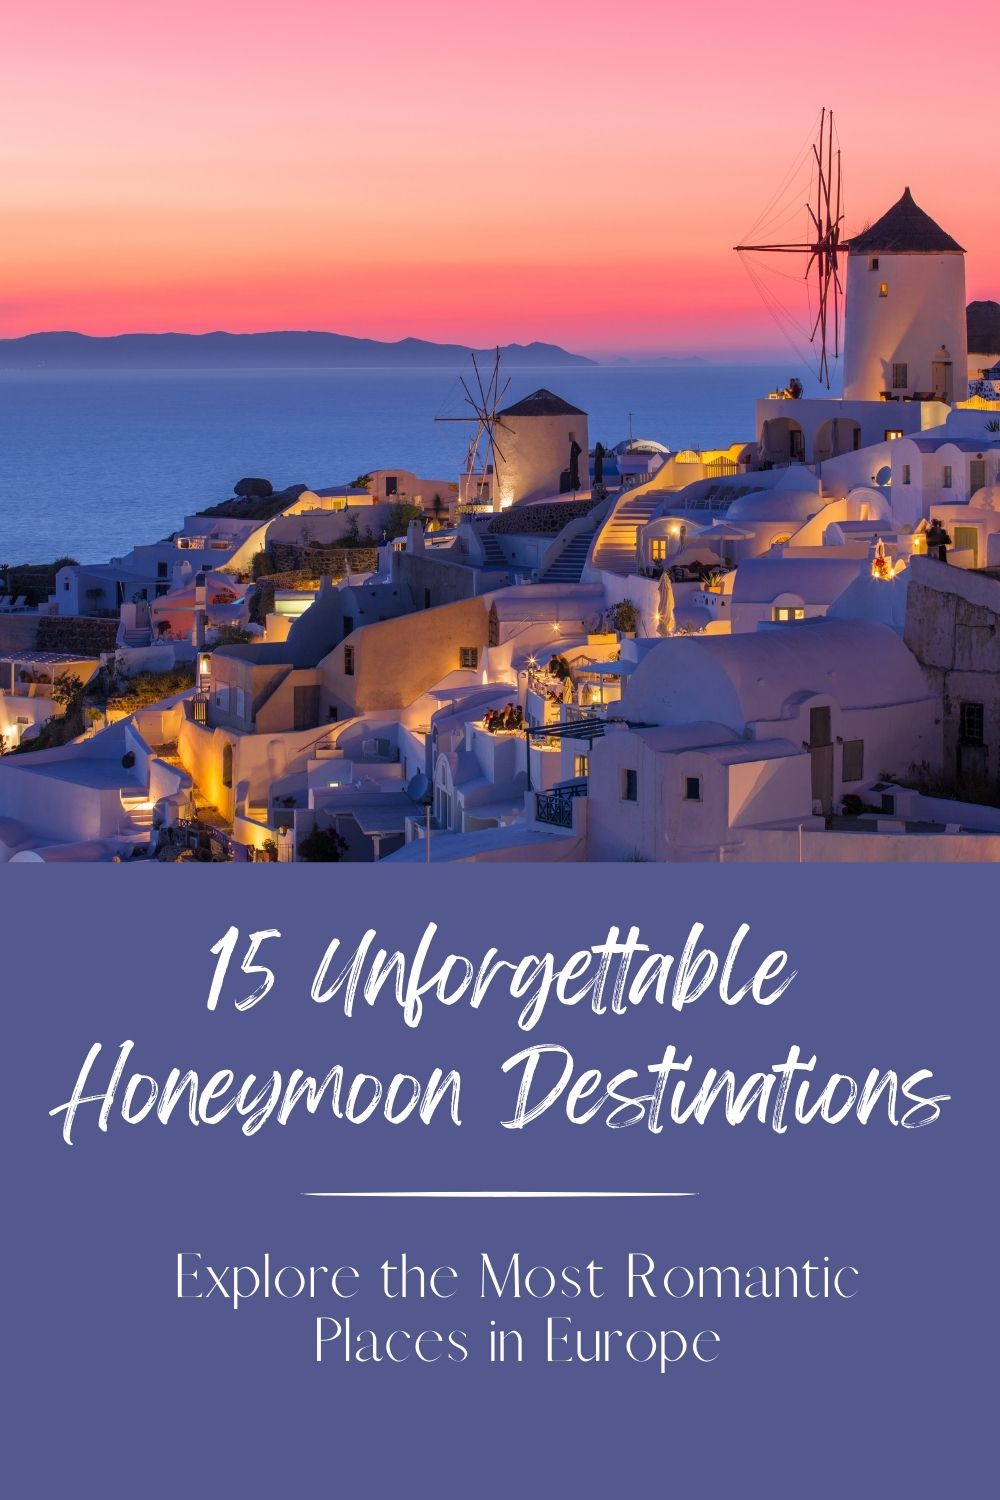 15 Unforgettable Honeymoon Destinations Pin - Picture of Santorini, Greece at Sunset